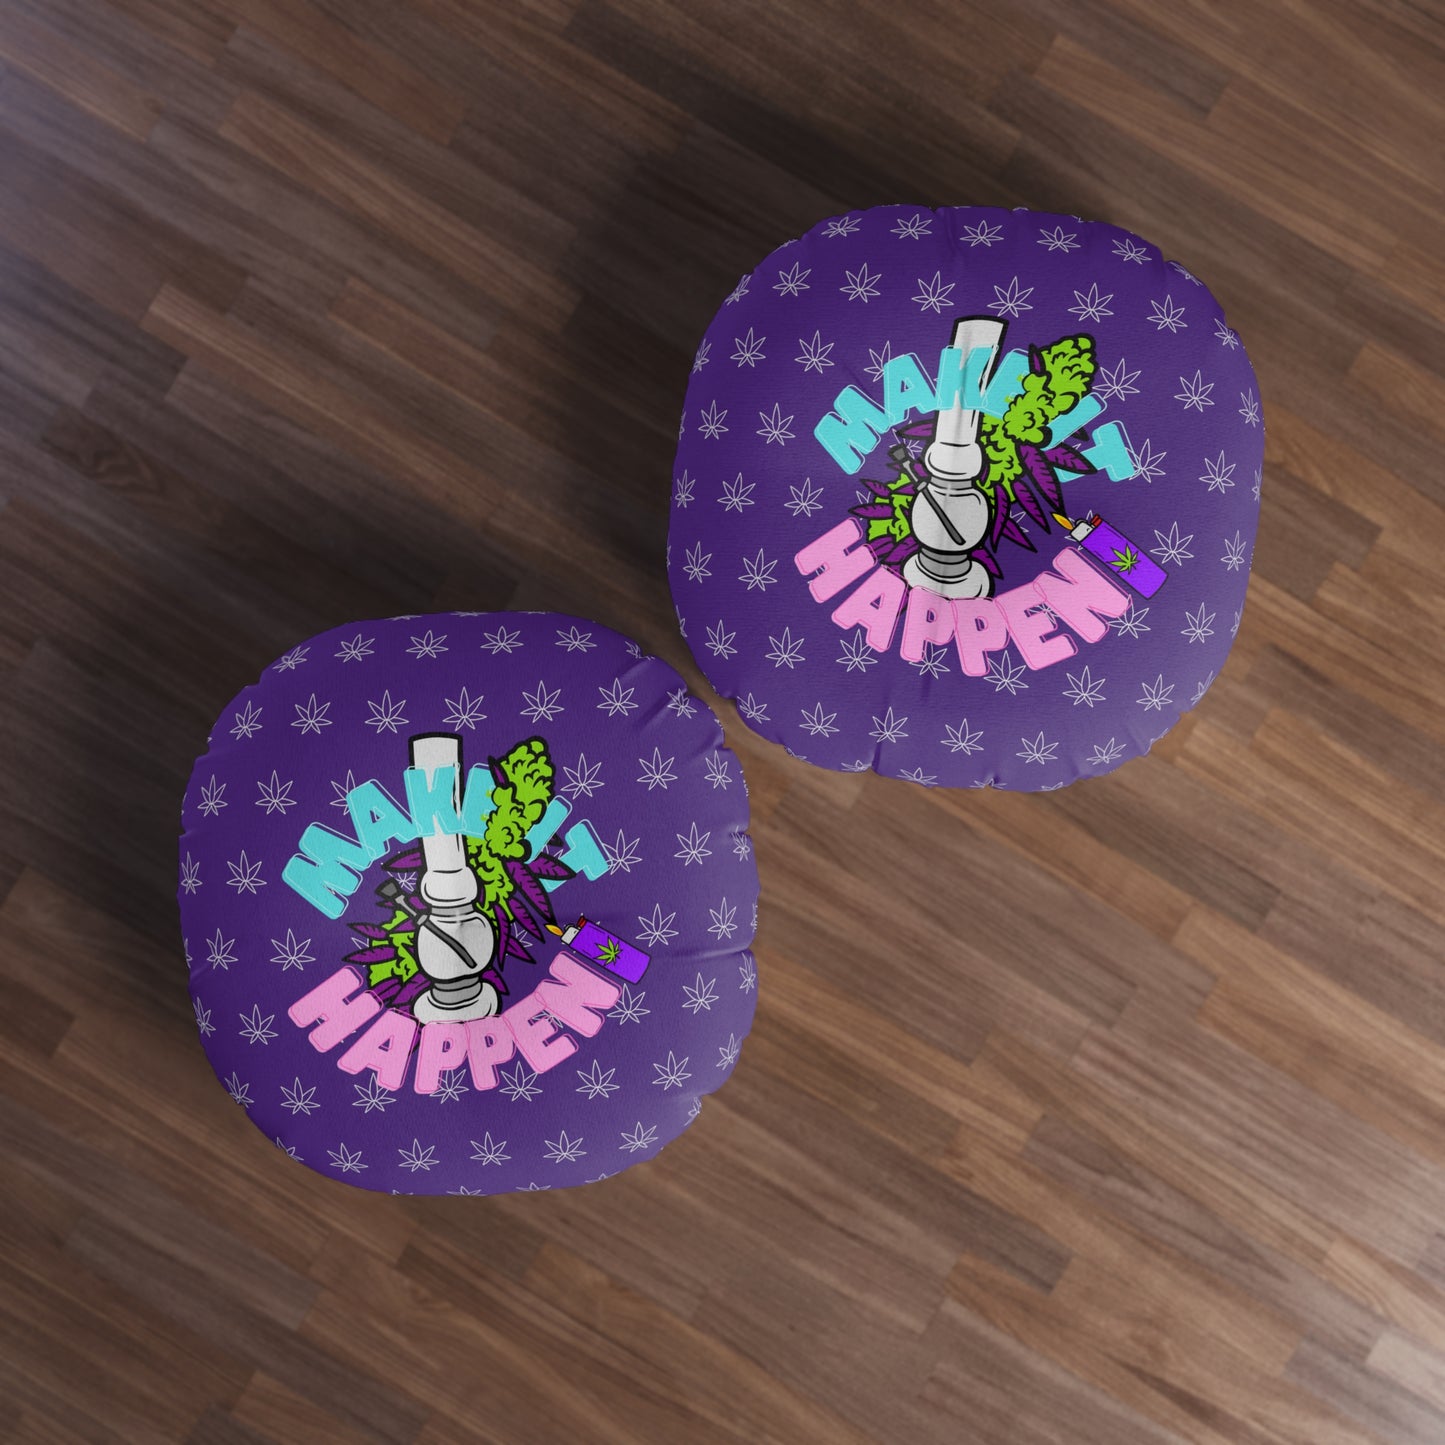 Two round Make It Happen Cannabis, Bong, & Lighter tufted floor cushions with a purple background and a "make it happen!" design featuring a clenched fist and decorative elements, placed on a wooden floor.